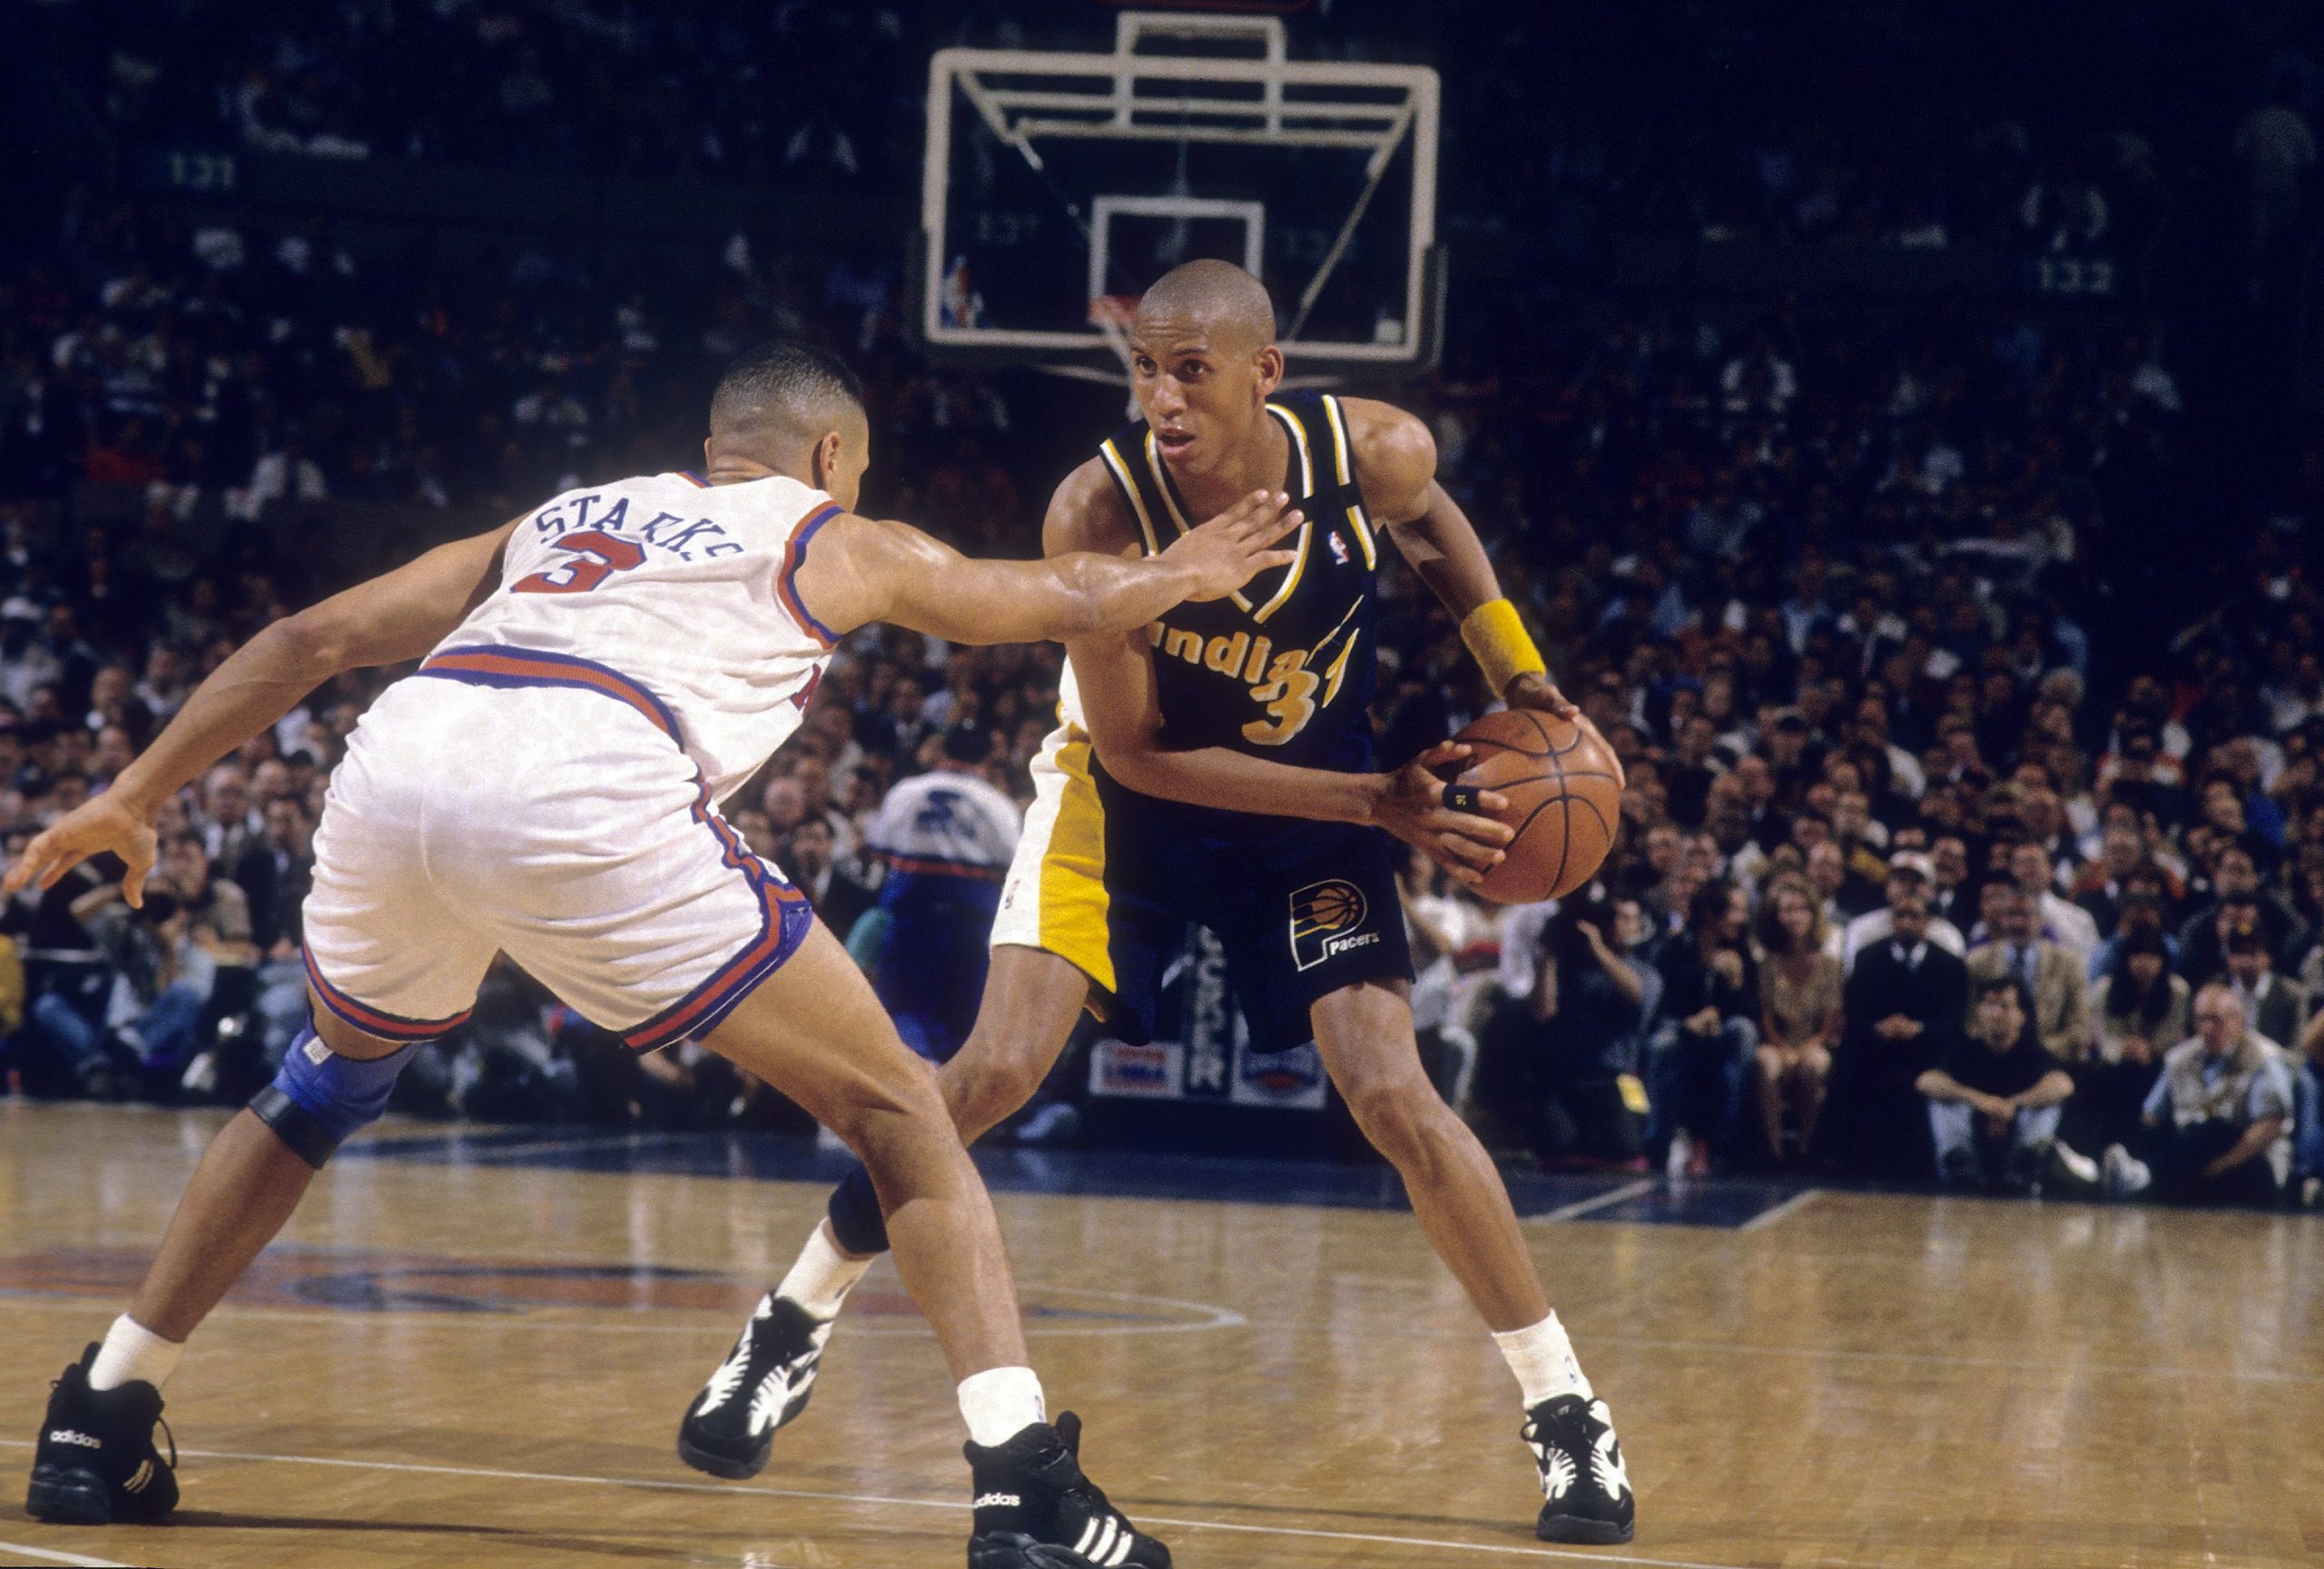 Reggie Miller of the Indiana Pacers is guarded closely by John Starks of the New York Knicks.